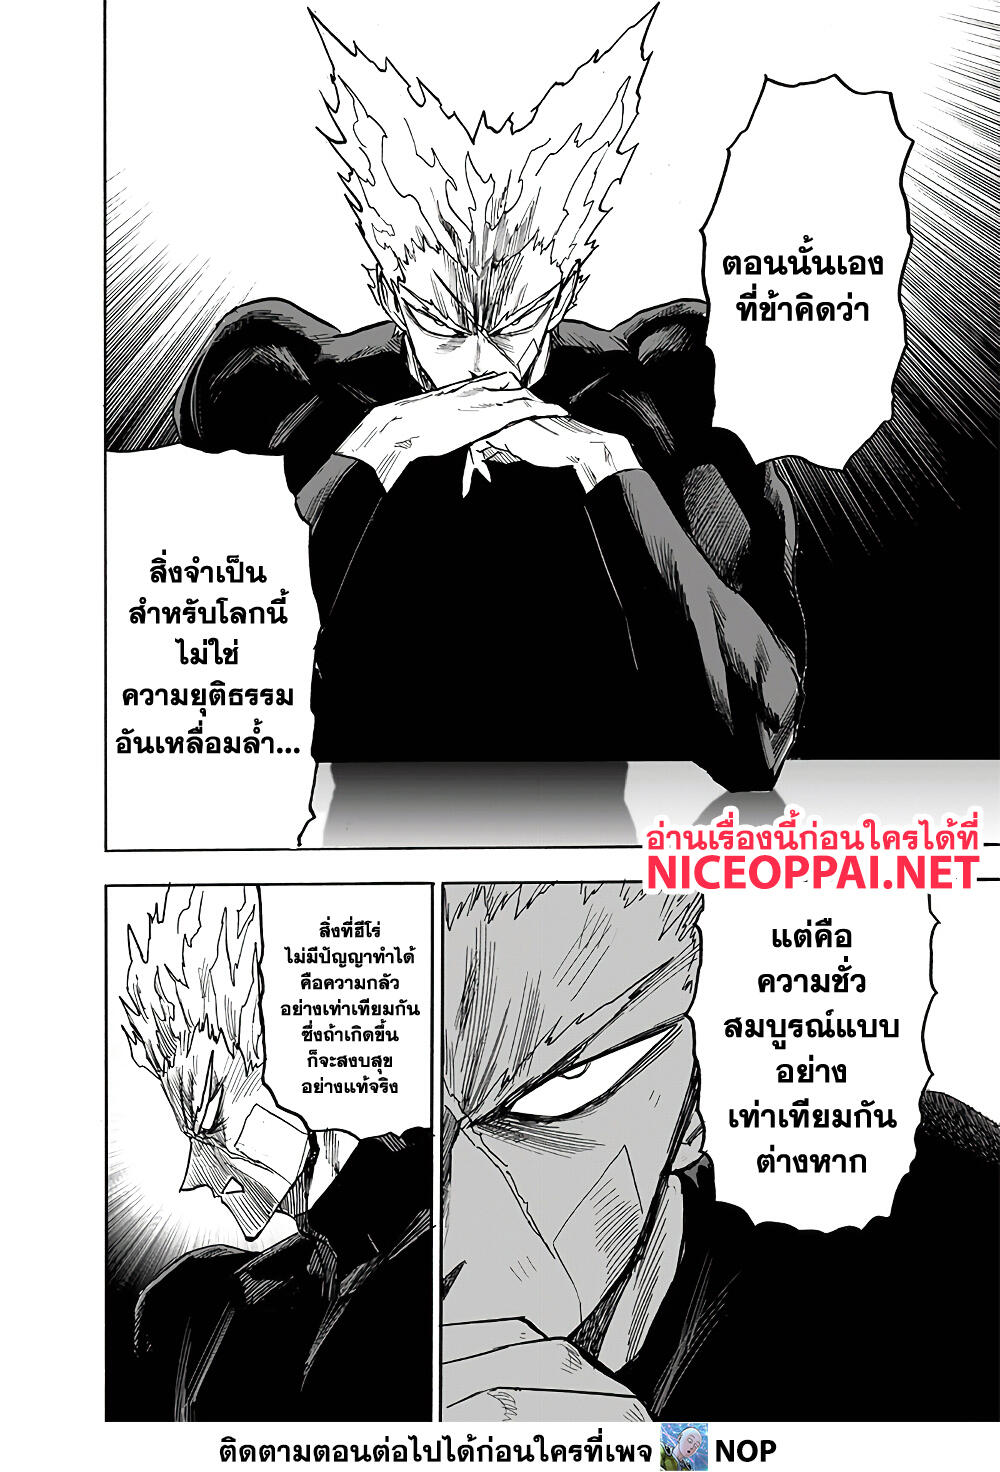 One Punch Man 170 TH